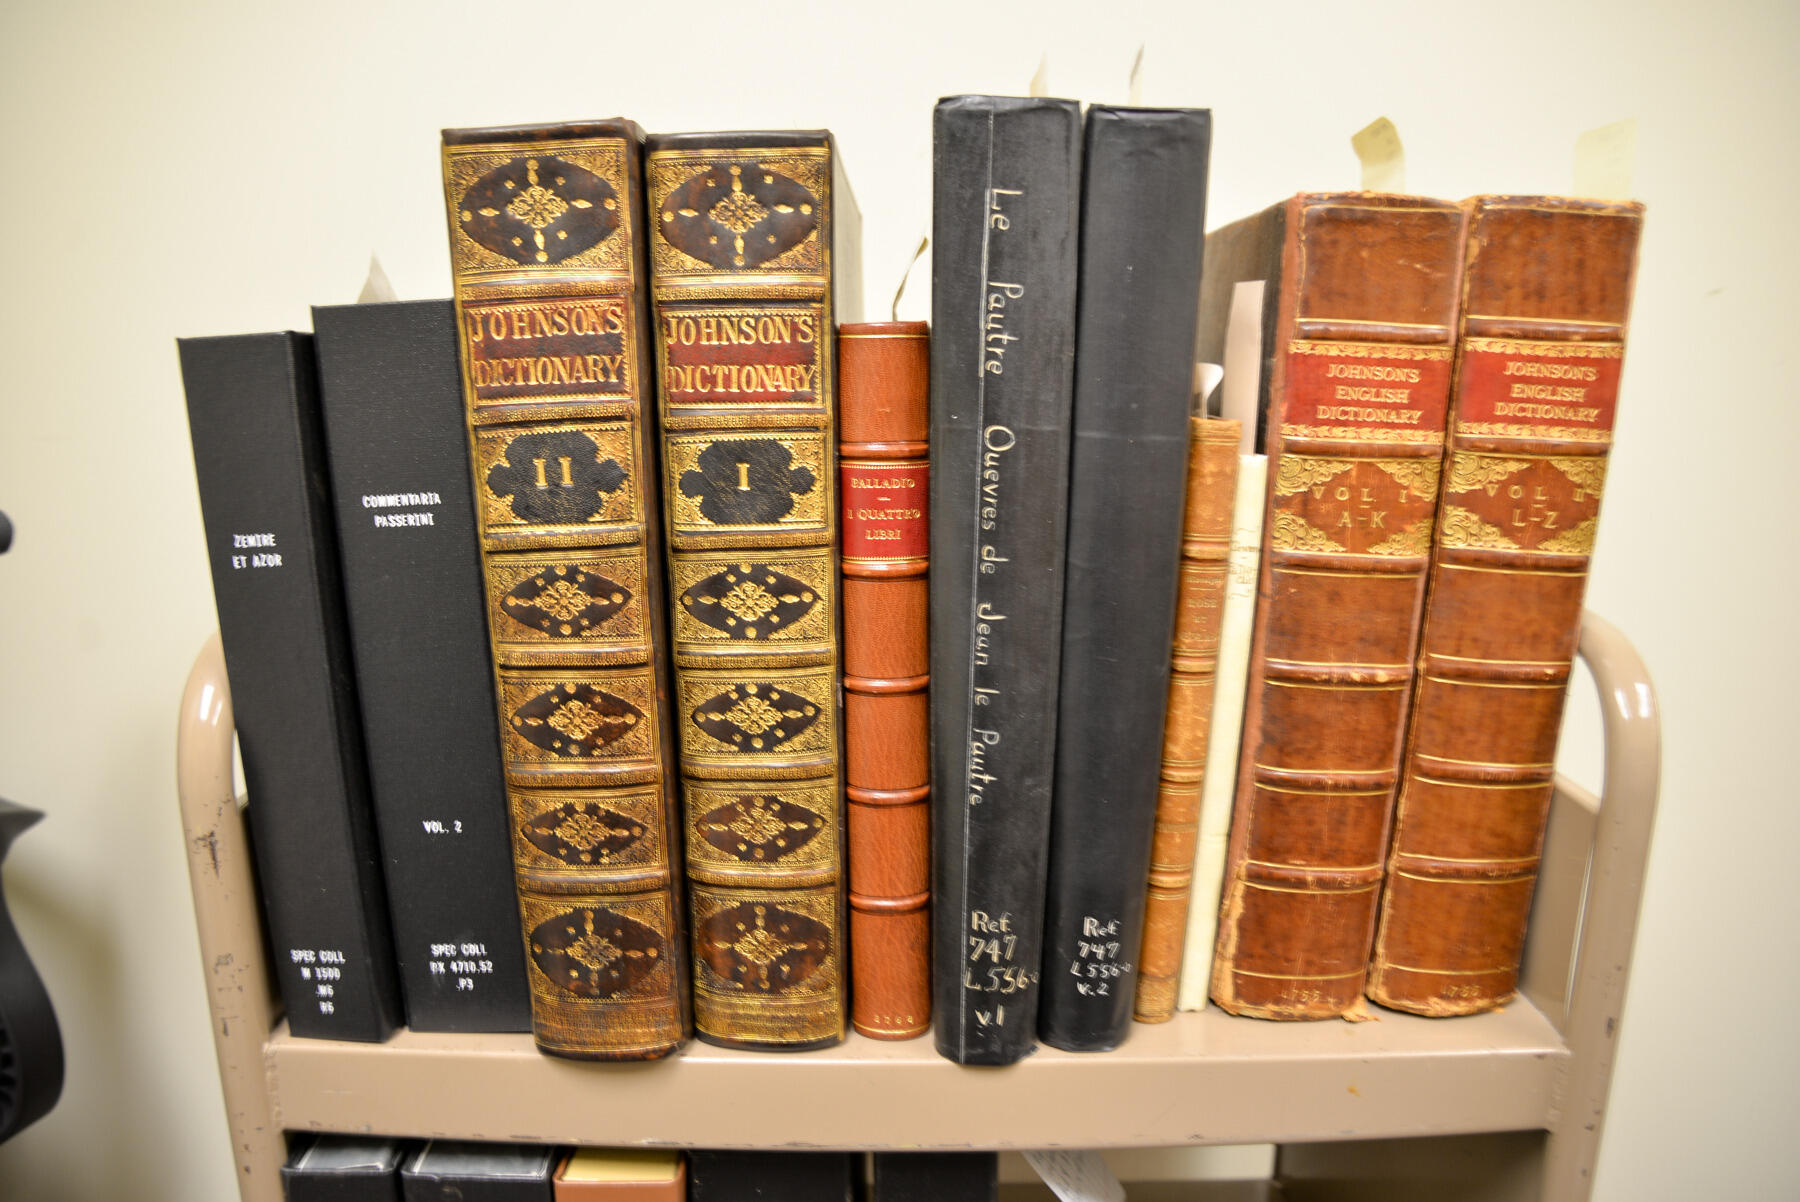 Neuhauser has been cataloging VCU Libraries’ trove of books published before 1800, including several early English dictionaries by Samuel Johnson.
